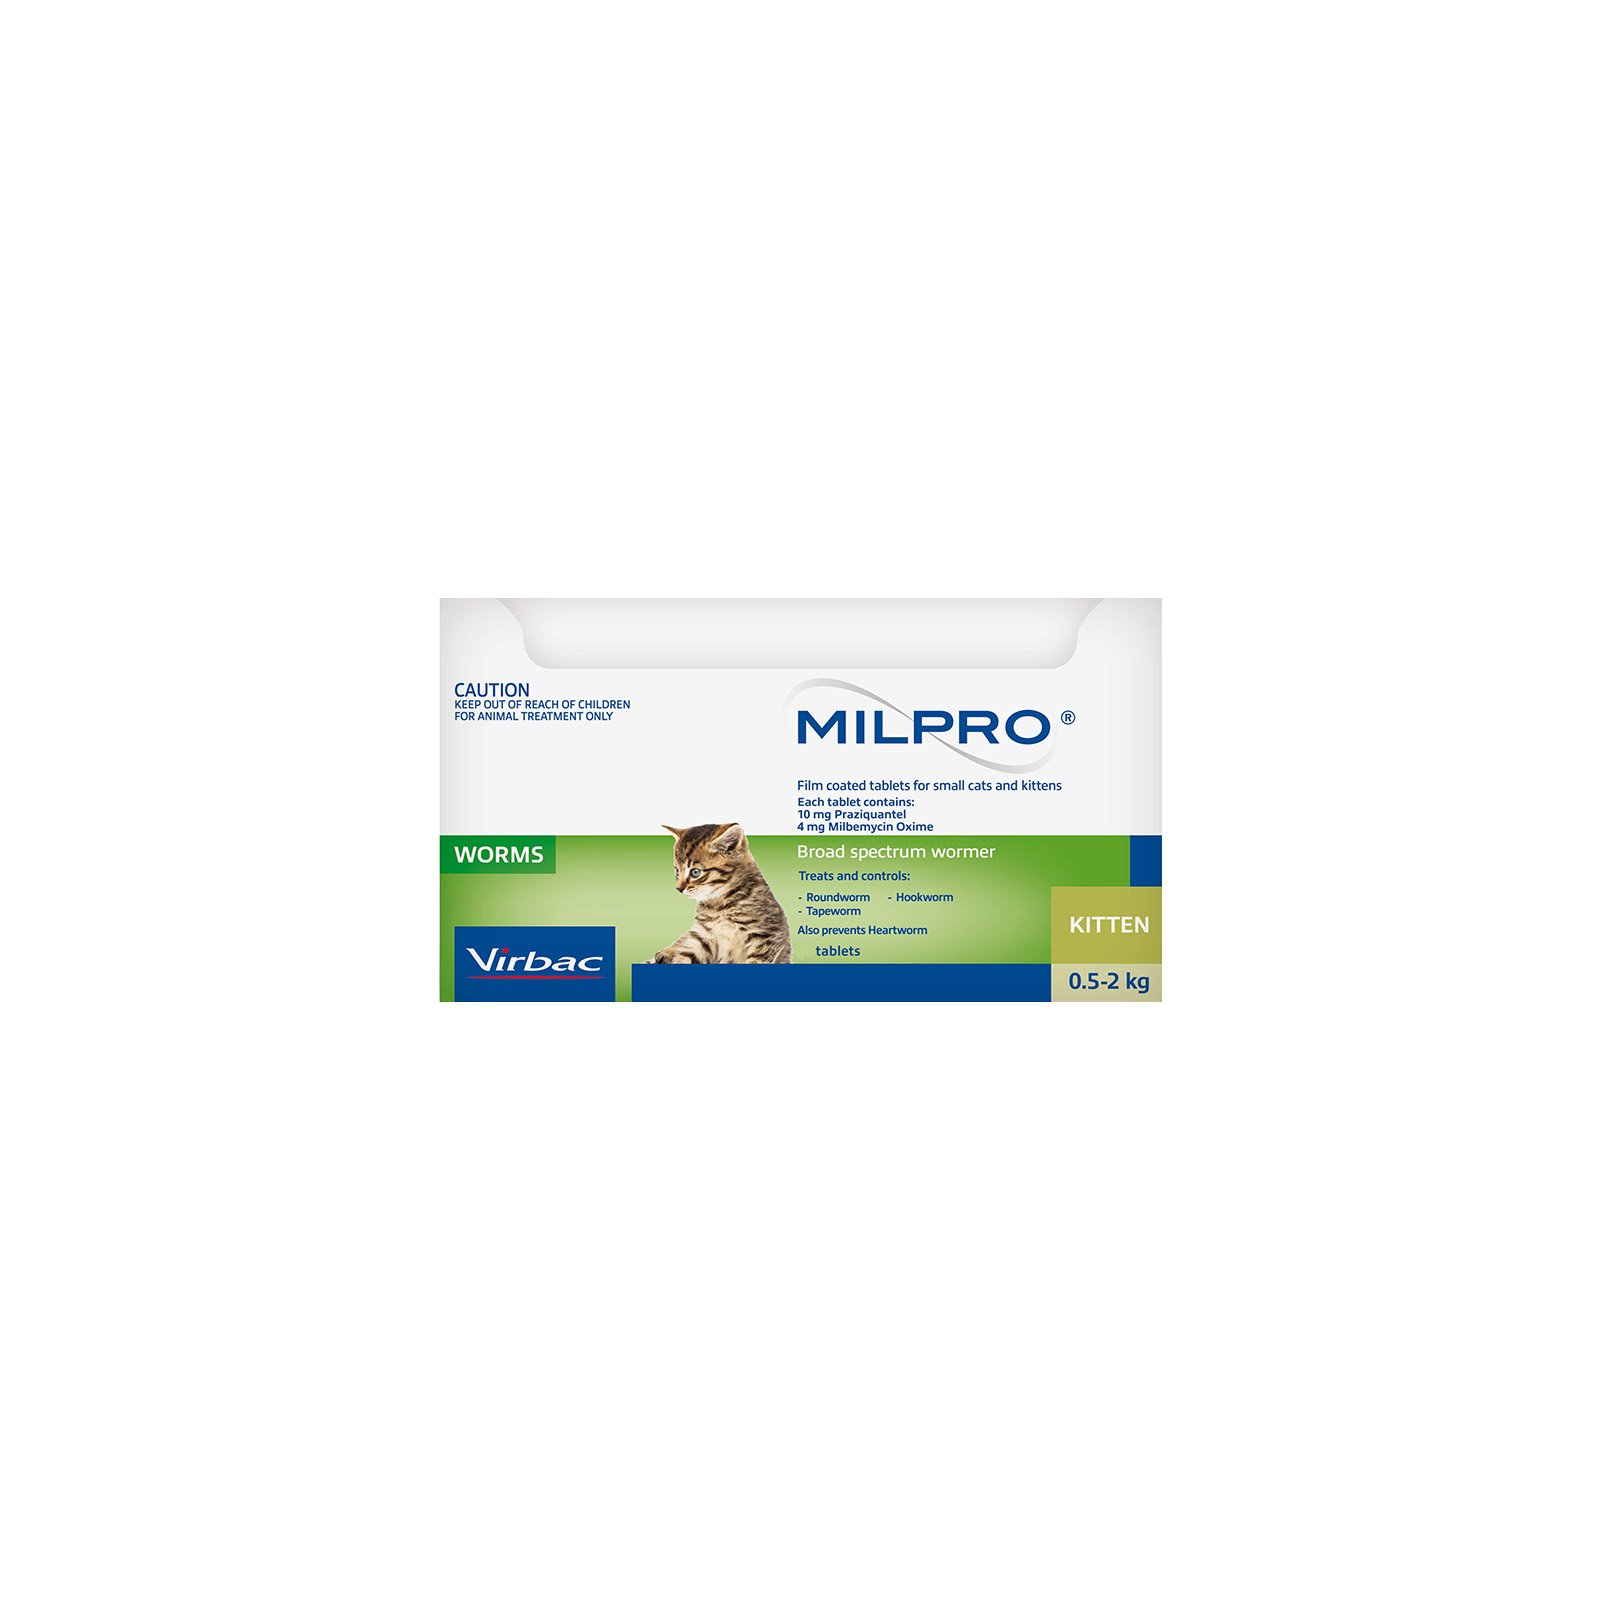 Milpro Allwormer For Cats 0.5 - 2 Kg 24 Tablet